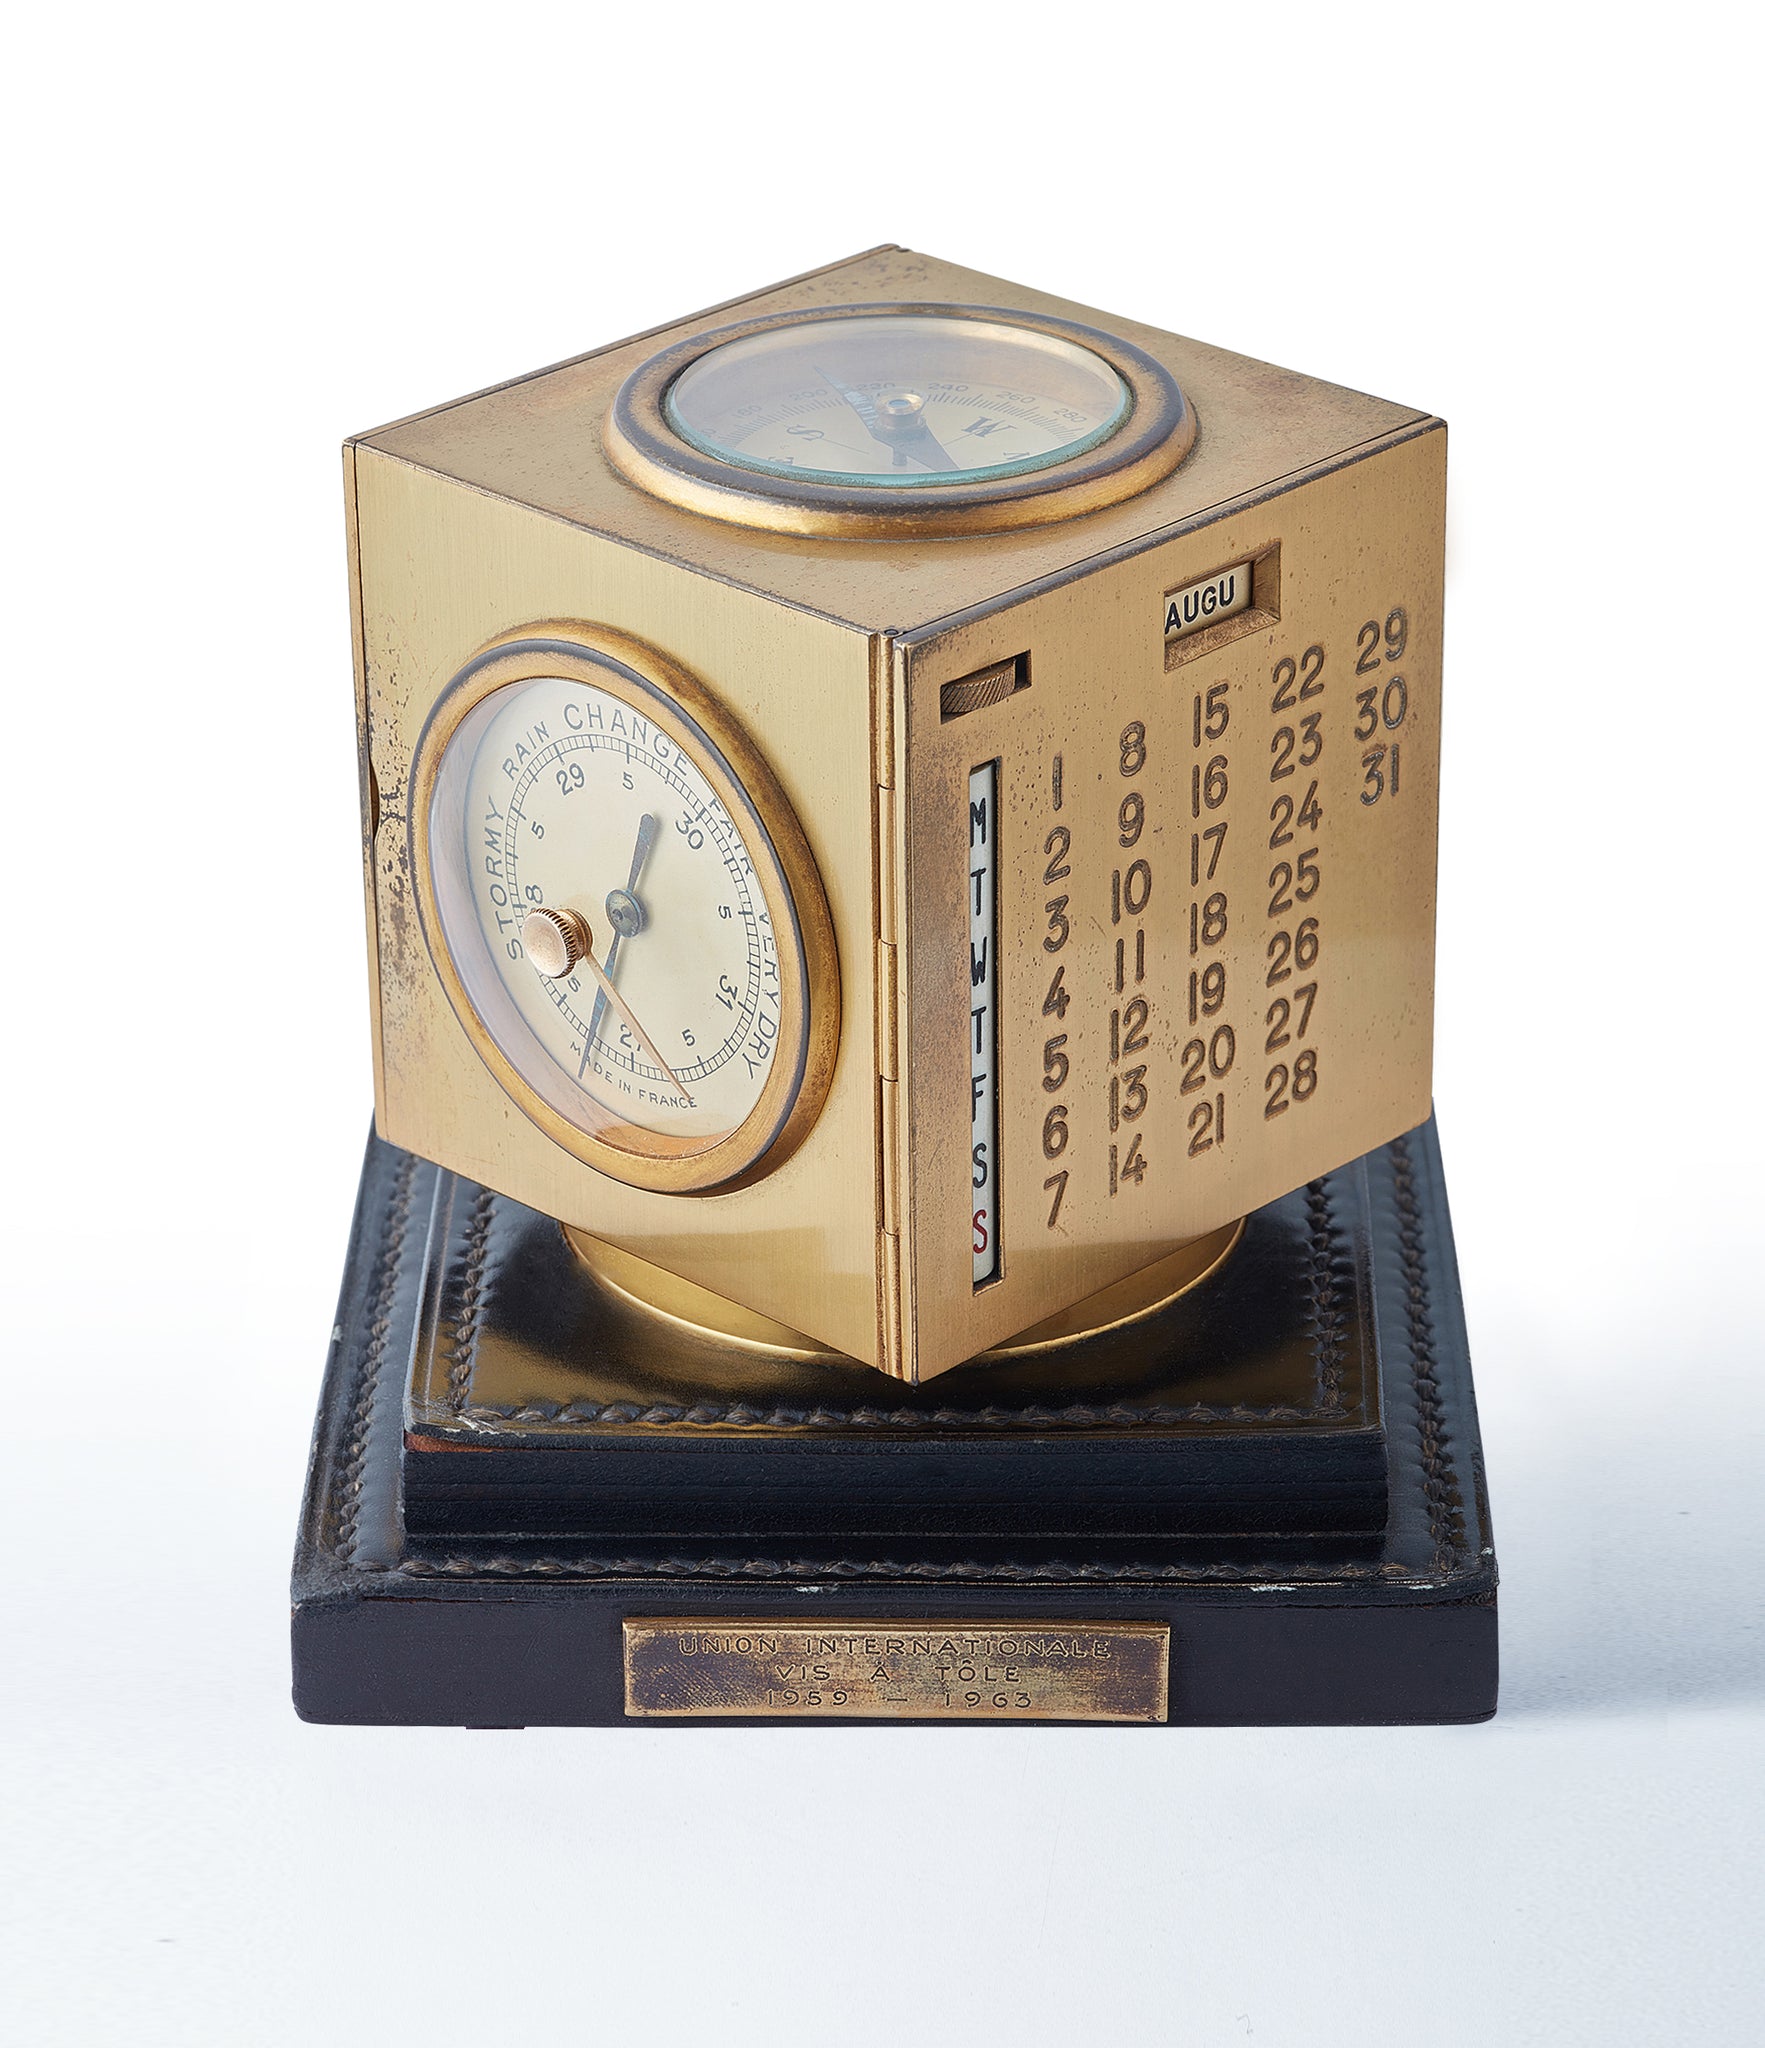 selling vintage Hermes Paris Compendium 8-day Art Deco brass calendar desk clock for sale online at A Collected Man for collectors of rare objects